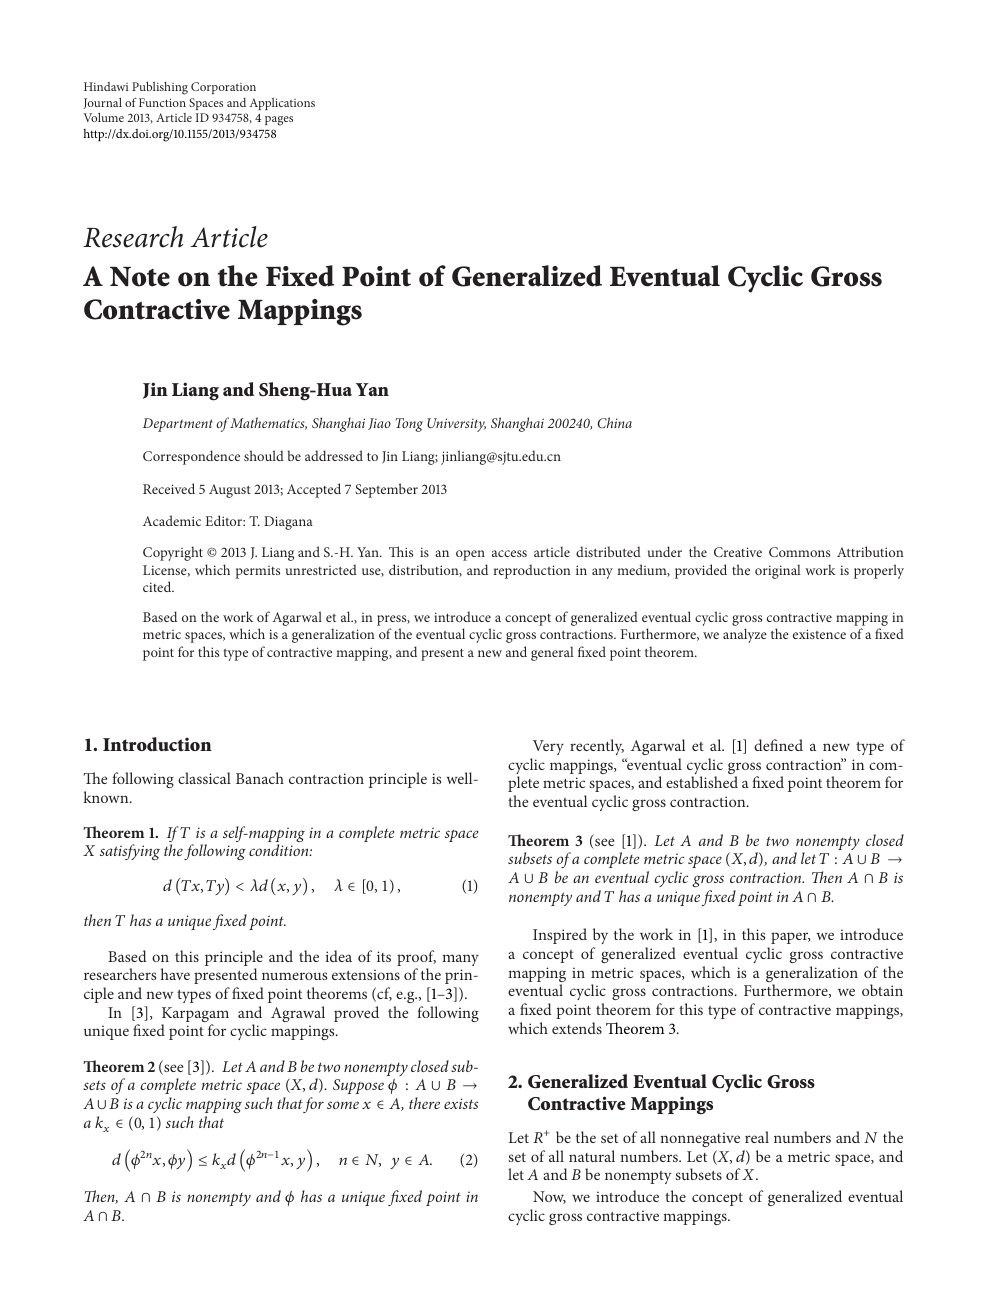 A Note On The Fixed Point Of Generalized Eventual Cyclic Gross Contractive Mappings Topic Of Research Paper In Mathematics Download Scholarly Article Pdf And Read For Free On Cyberleninka Open Science